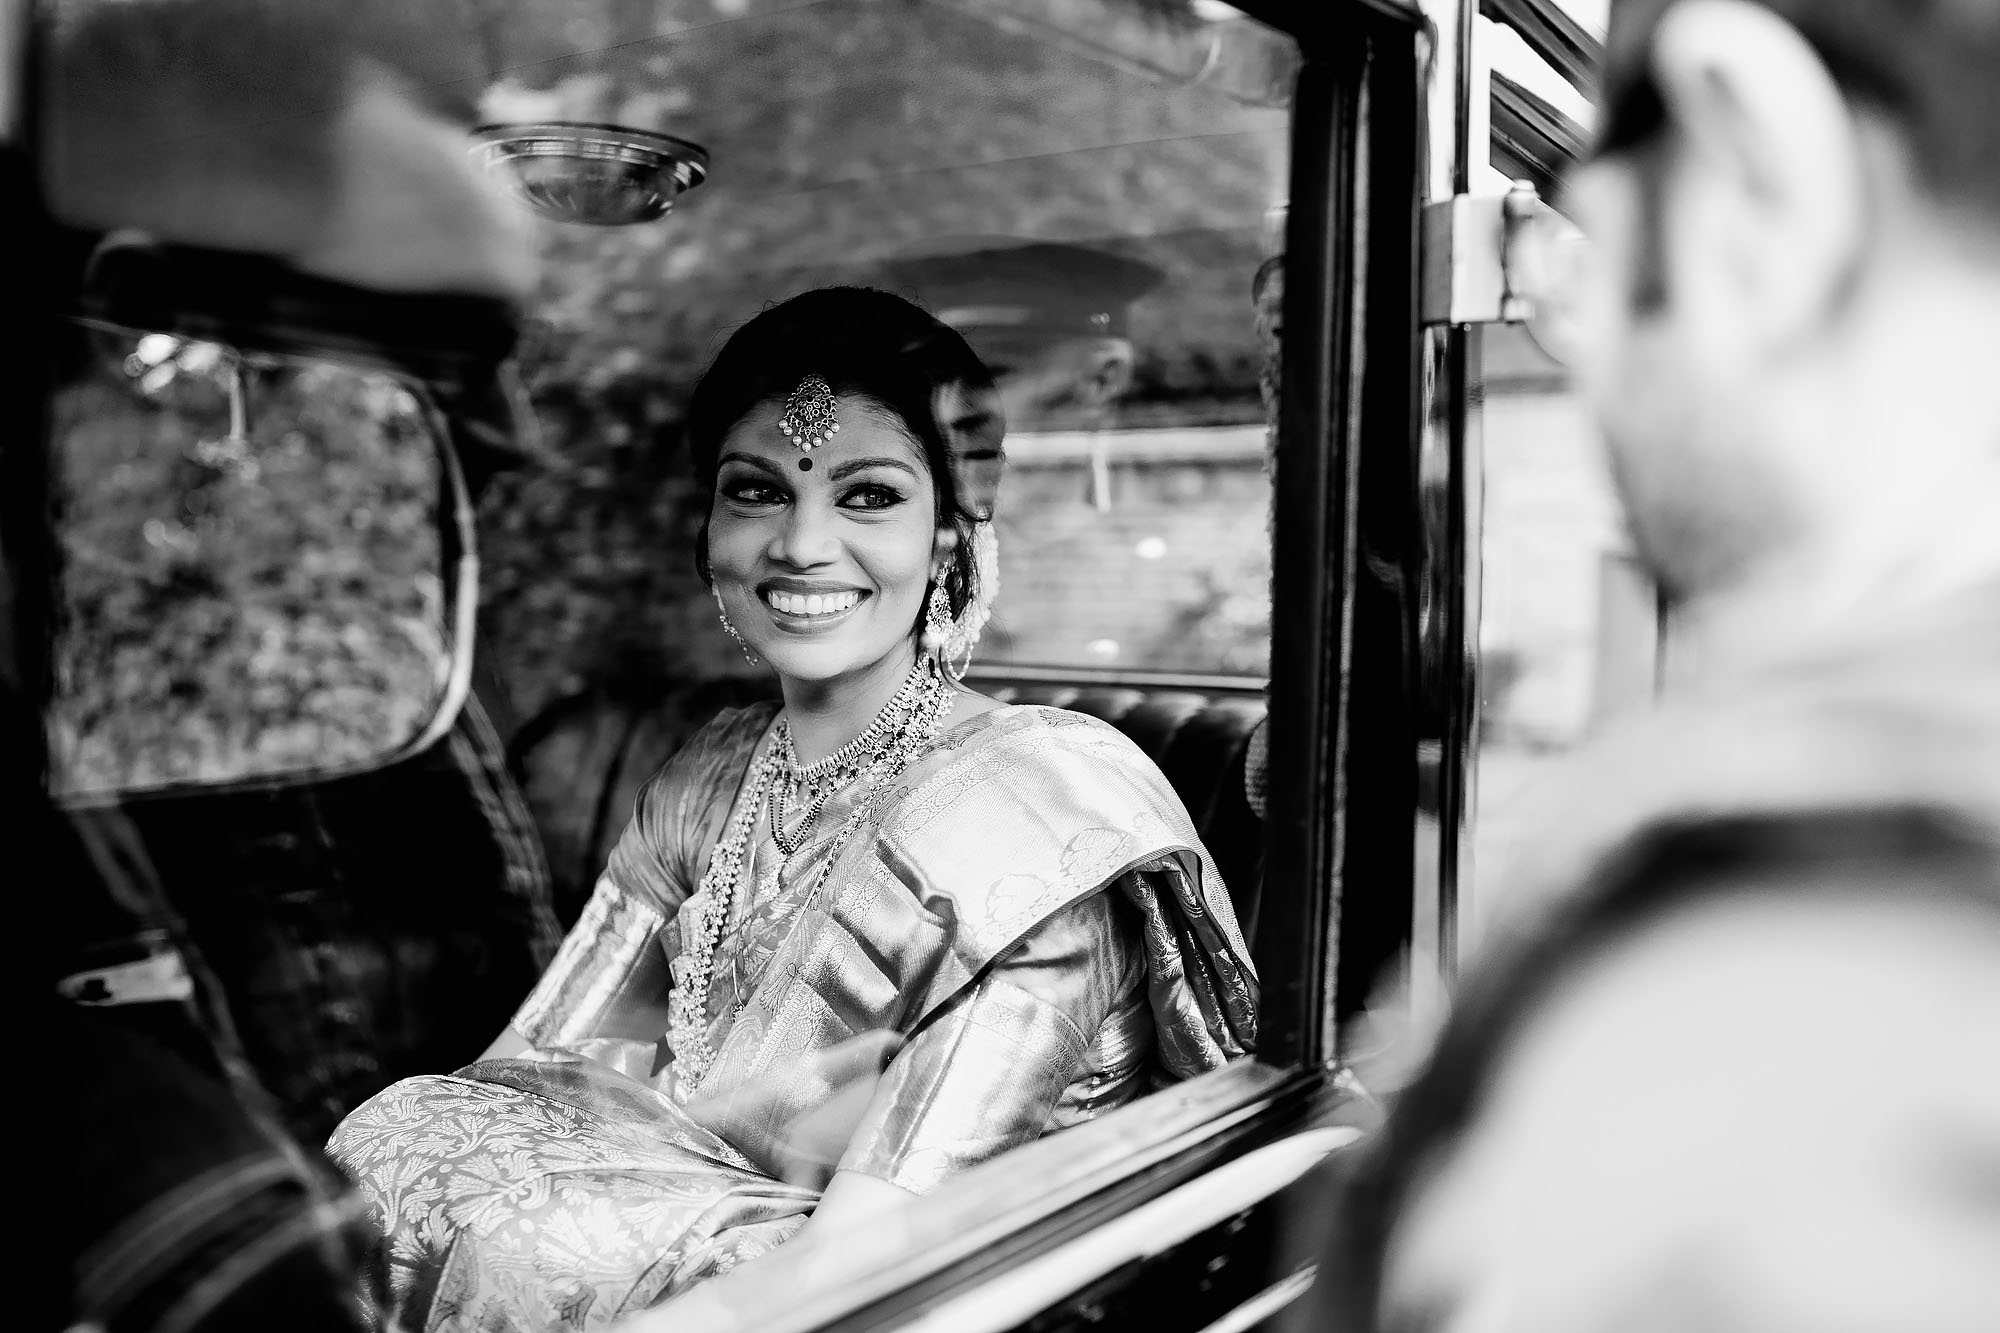 Combermere abbey wedding photography by arj photography®